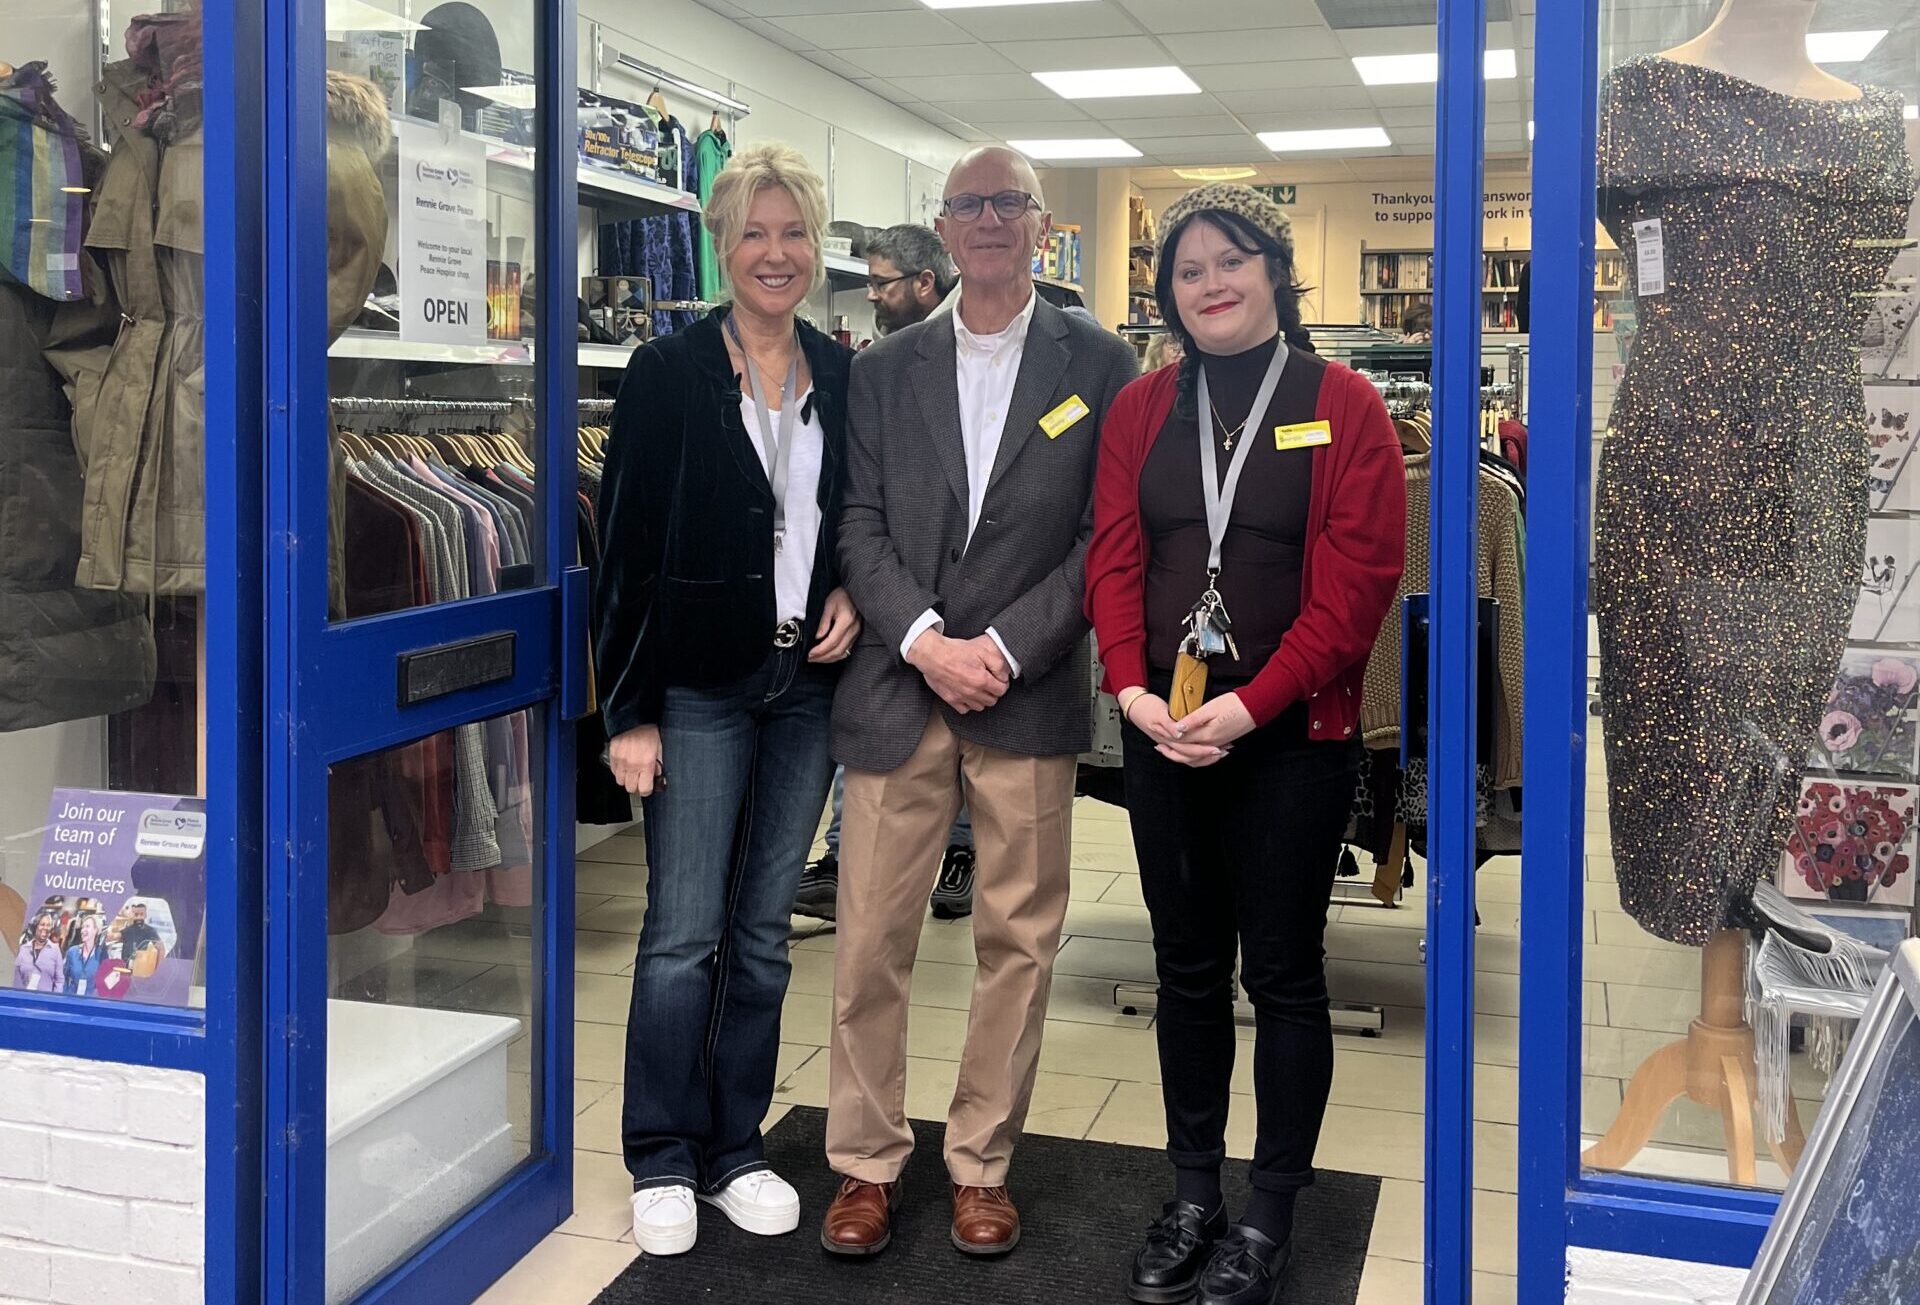 Two new charity shops for Rickmansworth 